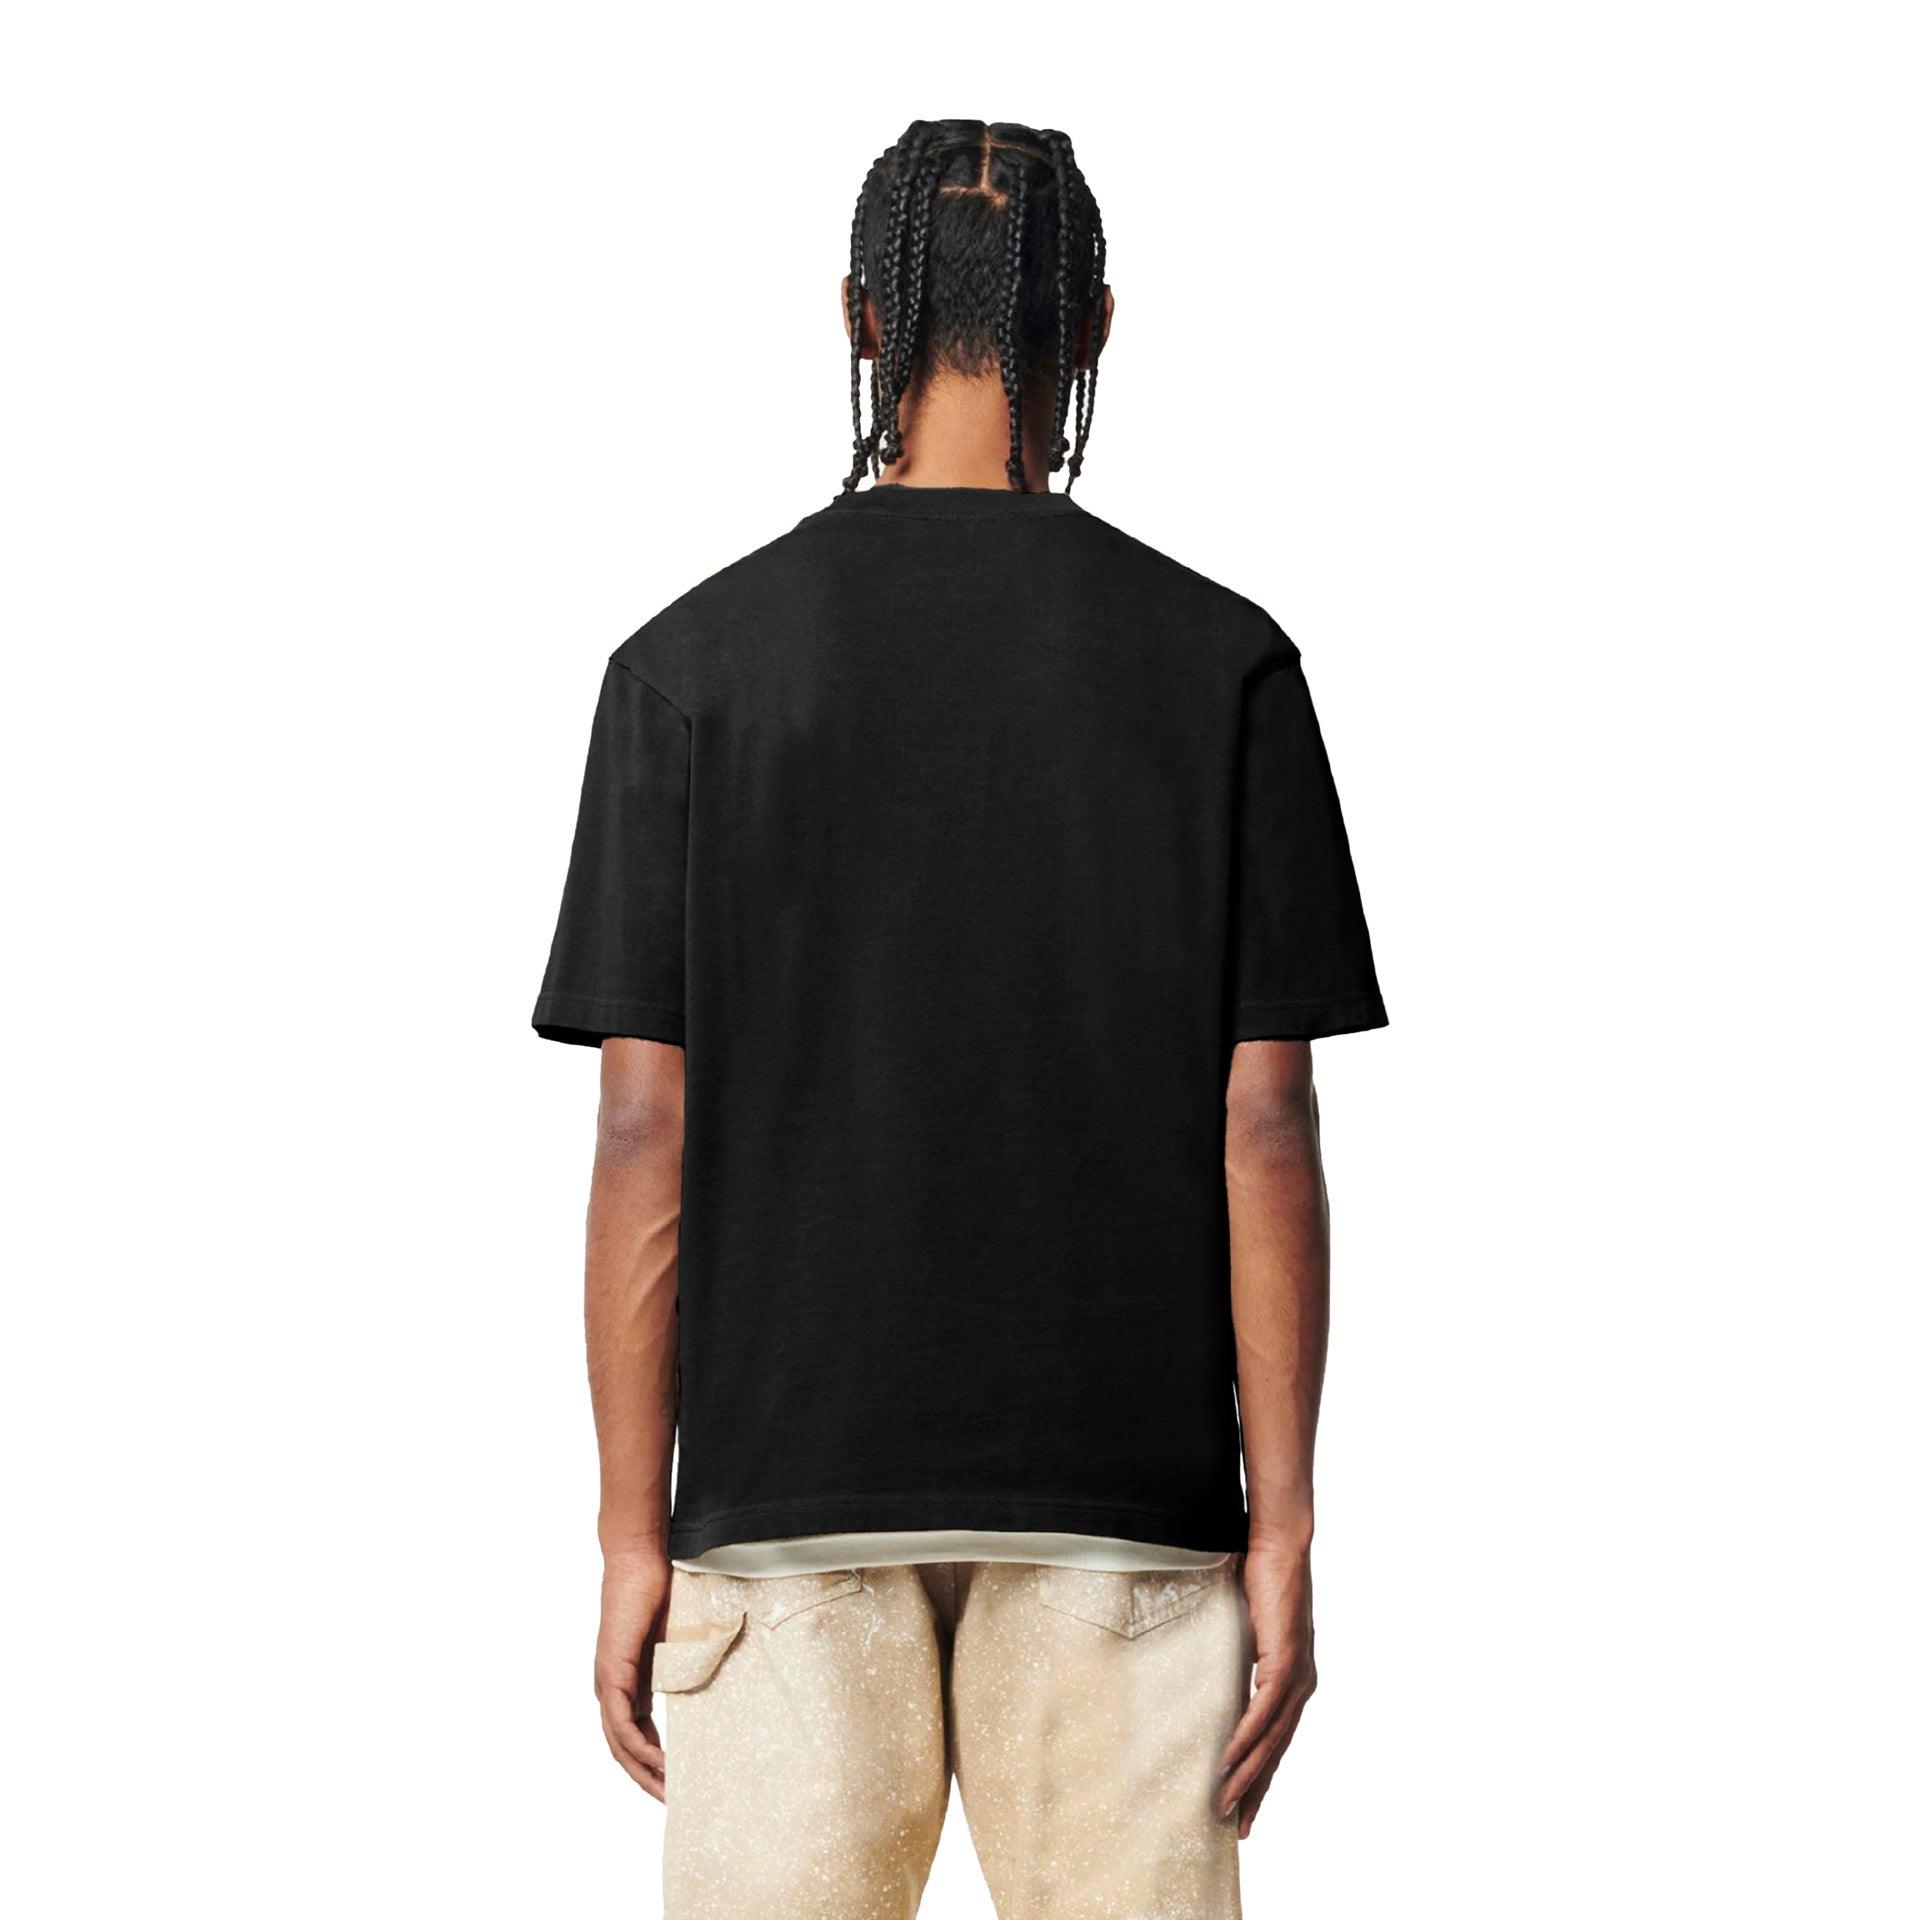 Black T-shirt From I'm West - WECRE8